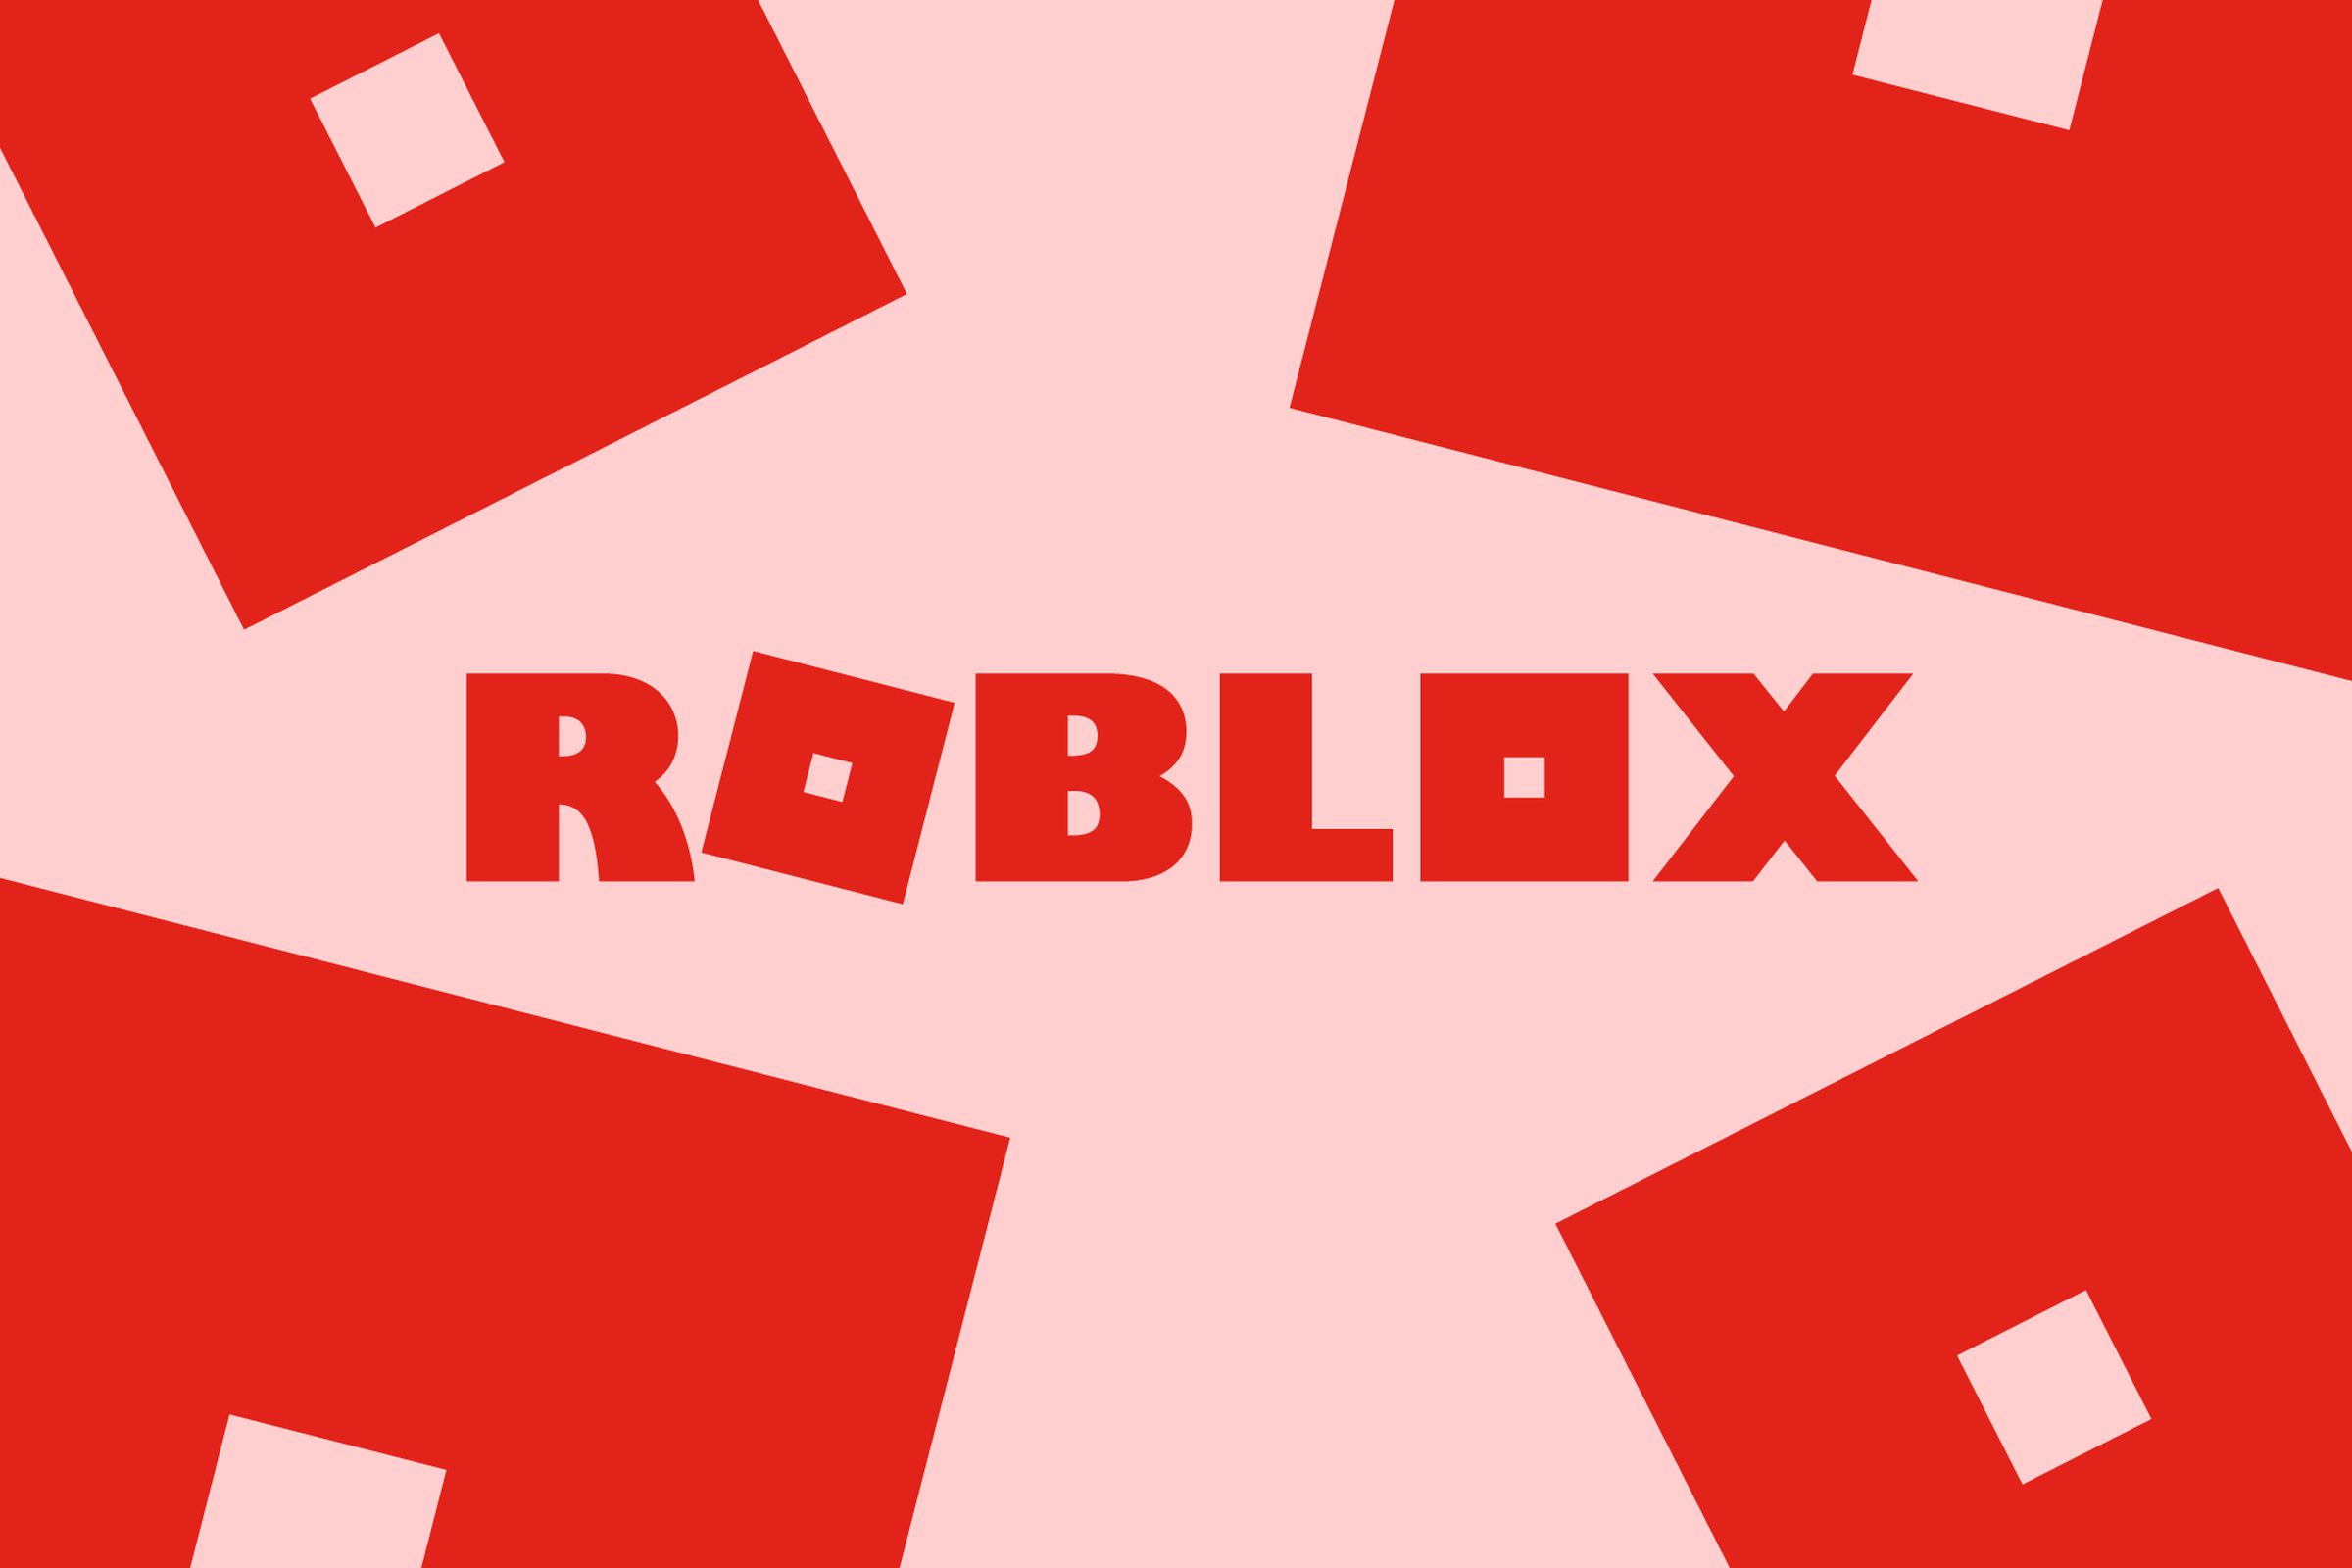 The Roblox logo in red, surrounded by blocky shapes on a pink background.